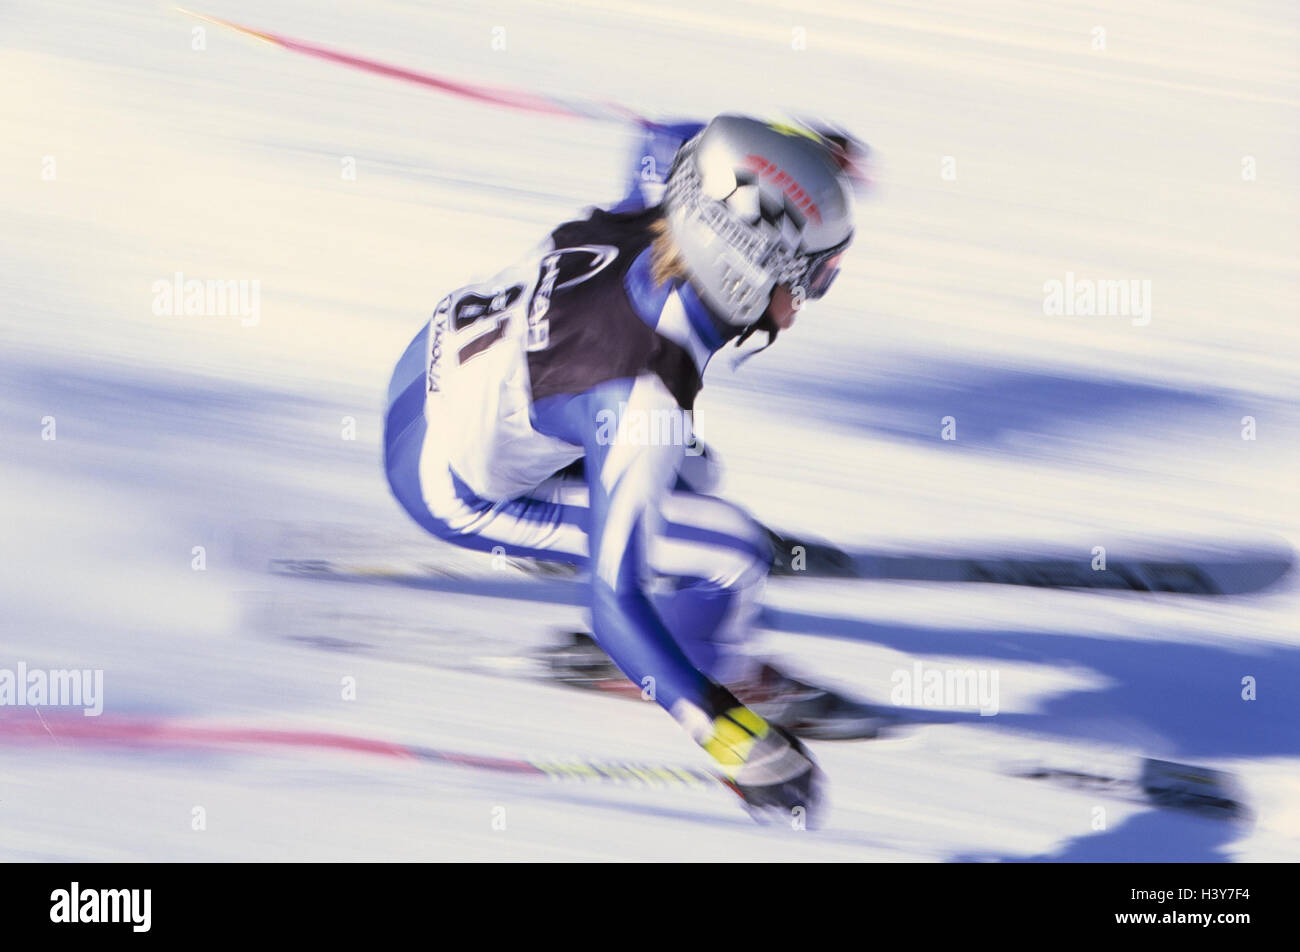 Ski racer, helped to pull, blur skiing, downhill race, giant slalom, giant slalom, downhill skiing, ski race, race, event, racing driver, skier, skiing, alpine sport, sport, leisure time, hobby, activity, speed, dynamics, motion, tempo, ski equipment, cra Stock Photo